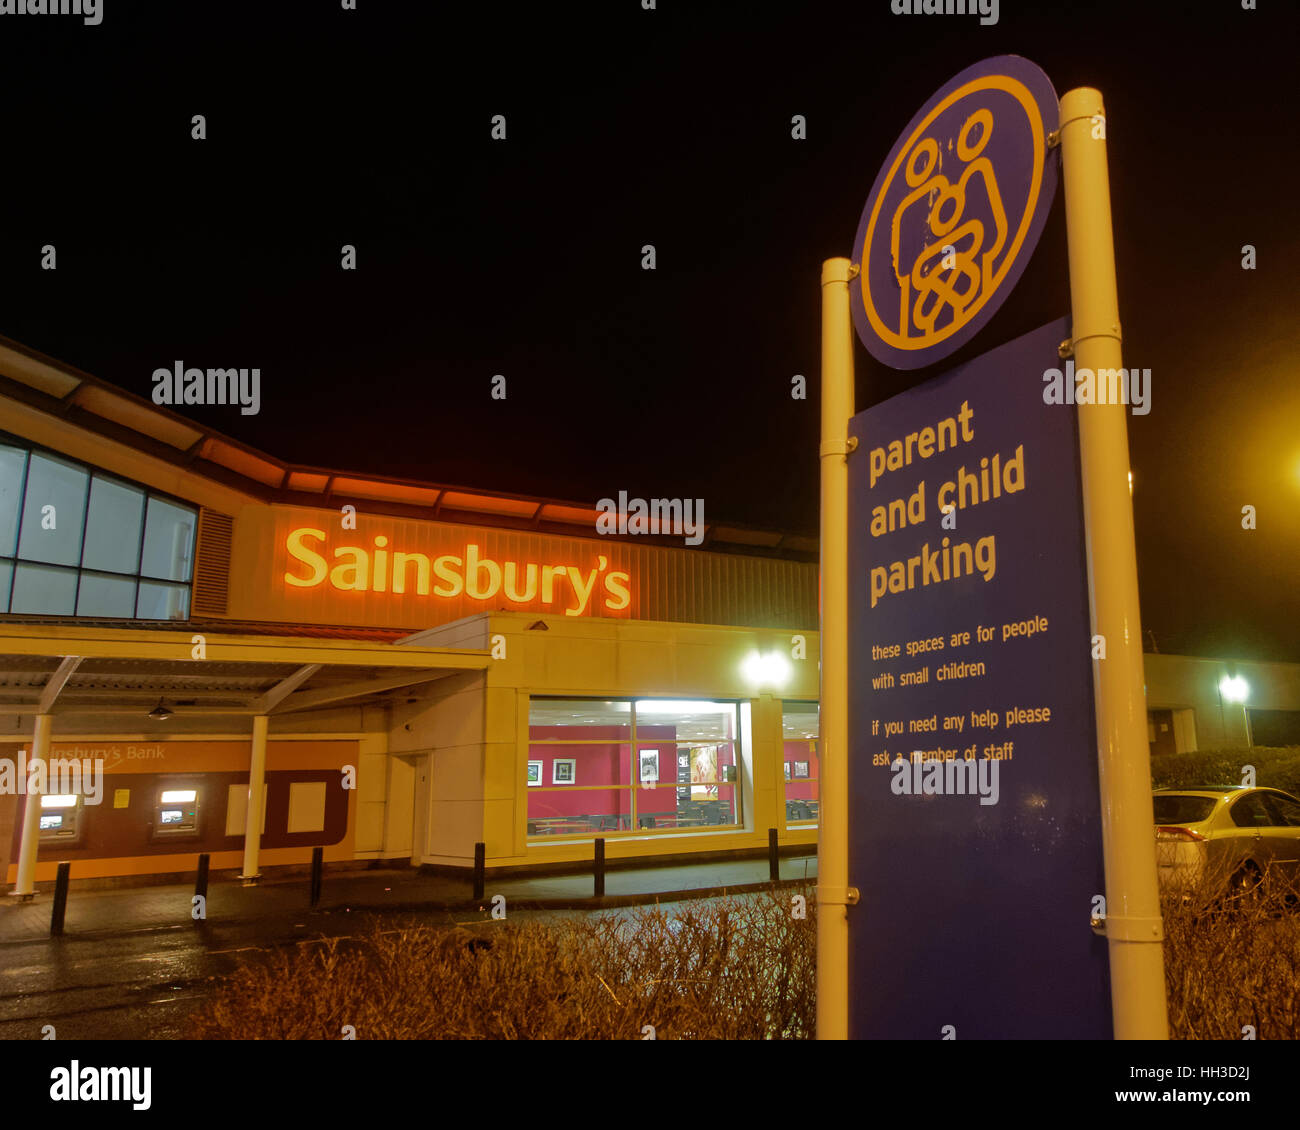 sainsbuty's parent and child parking sign at night Great Western Retail Park Stock Photo